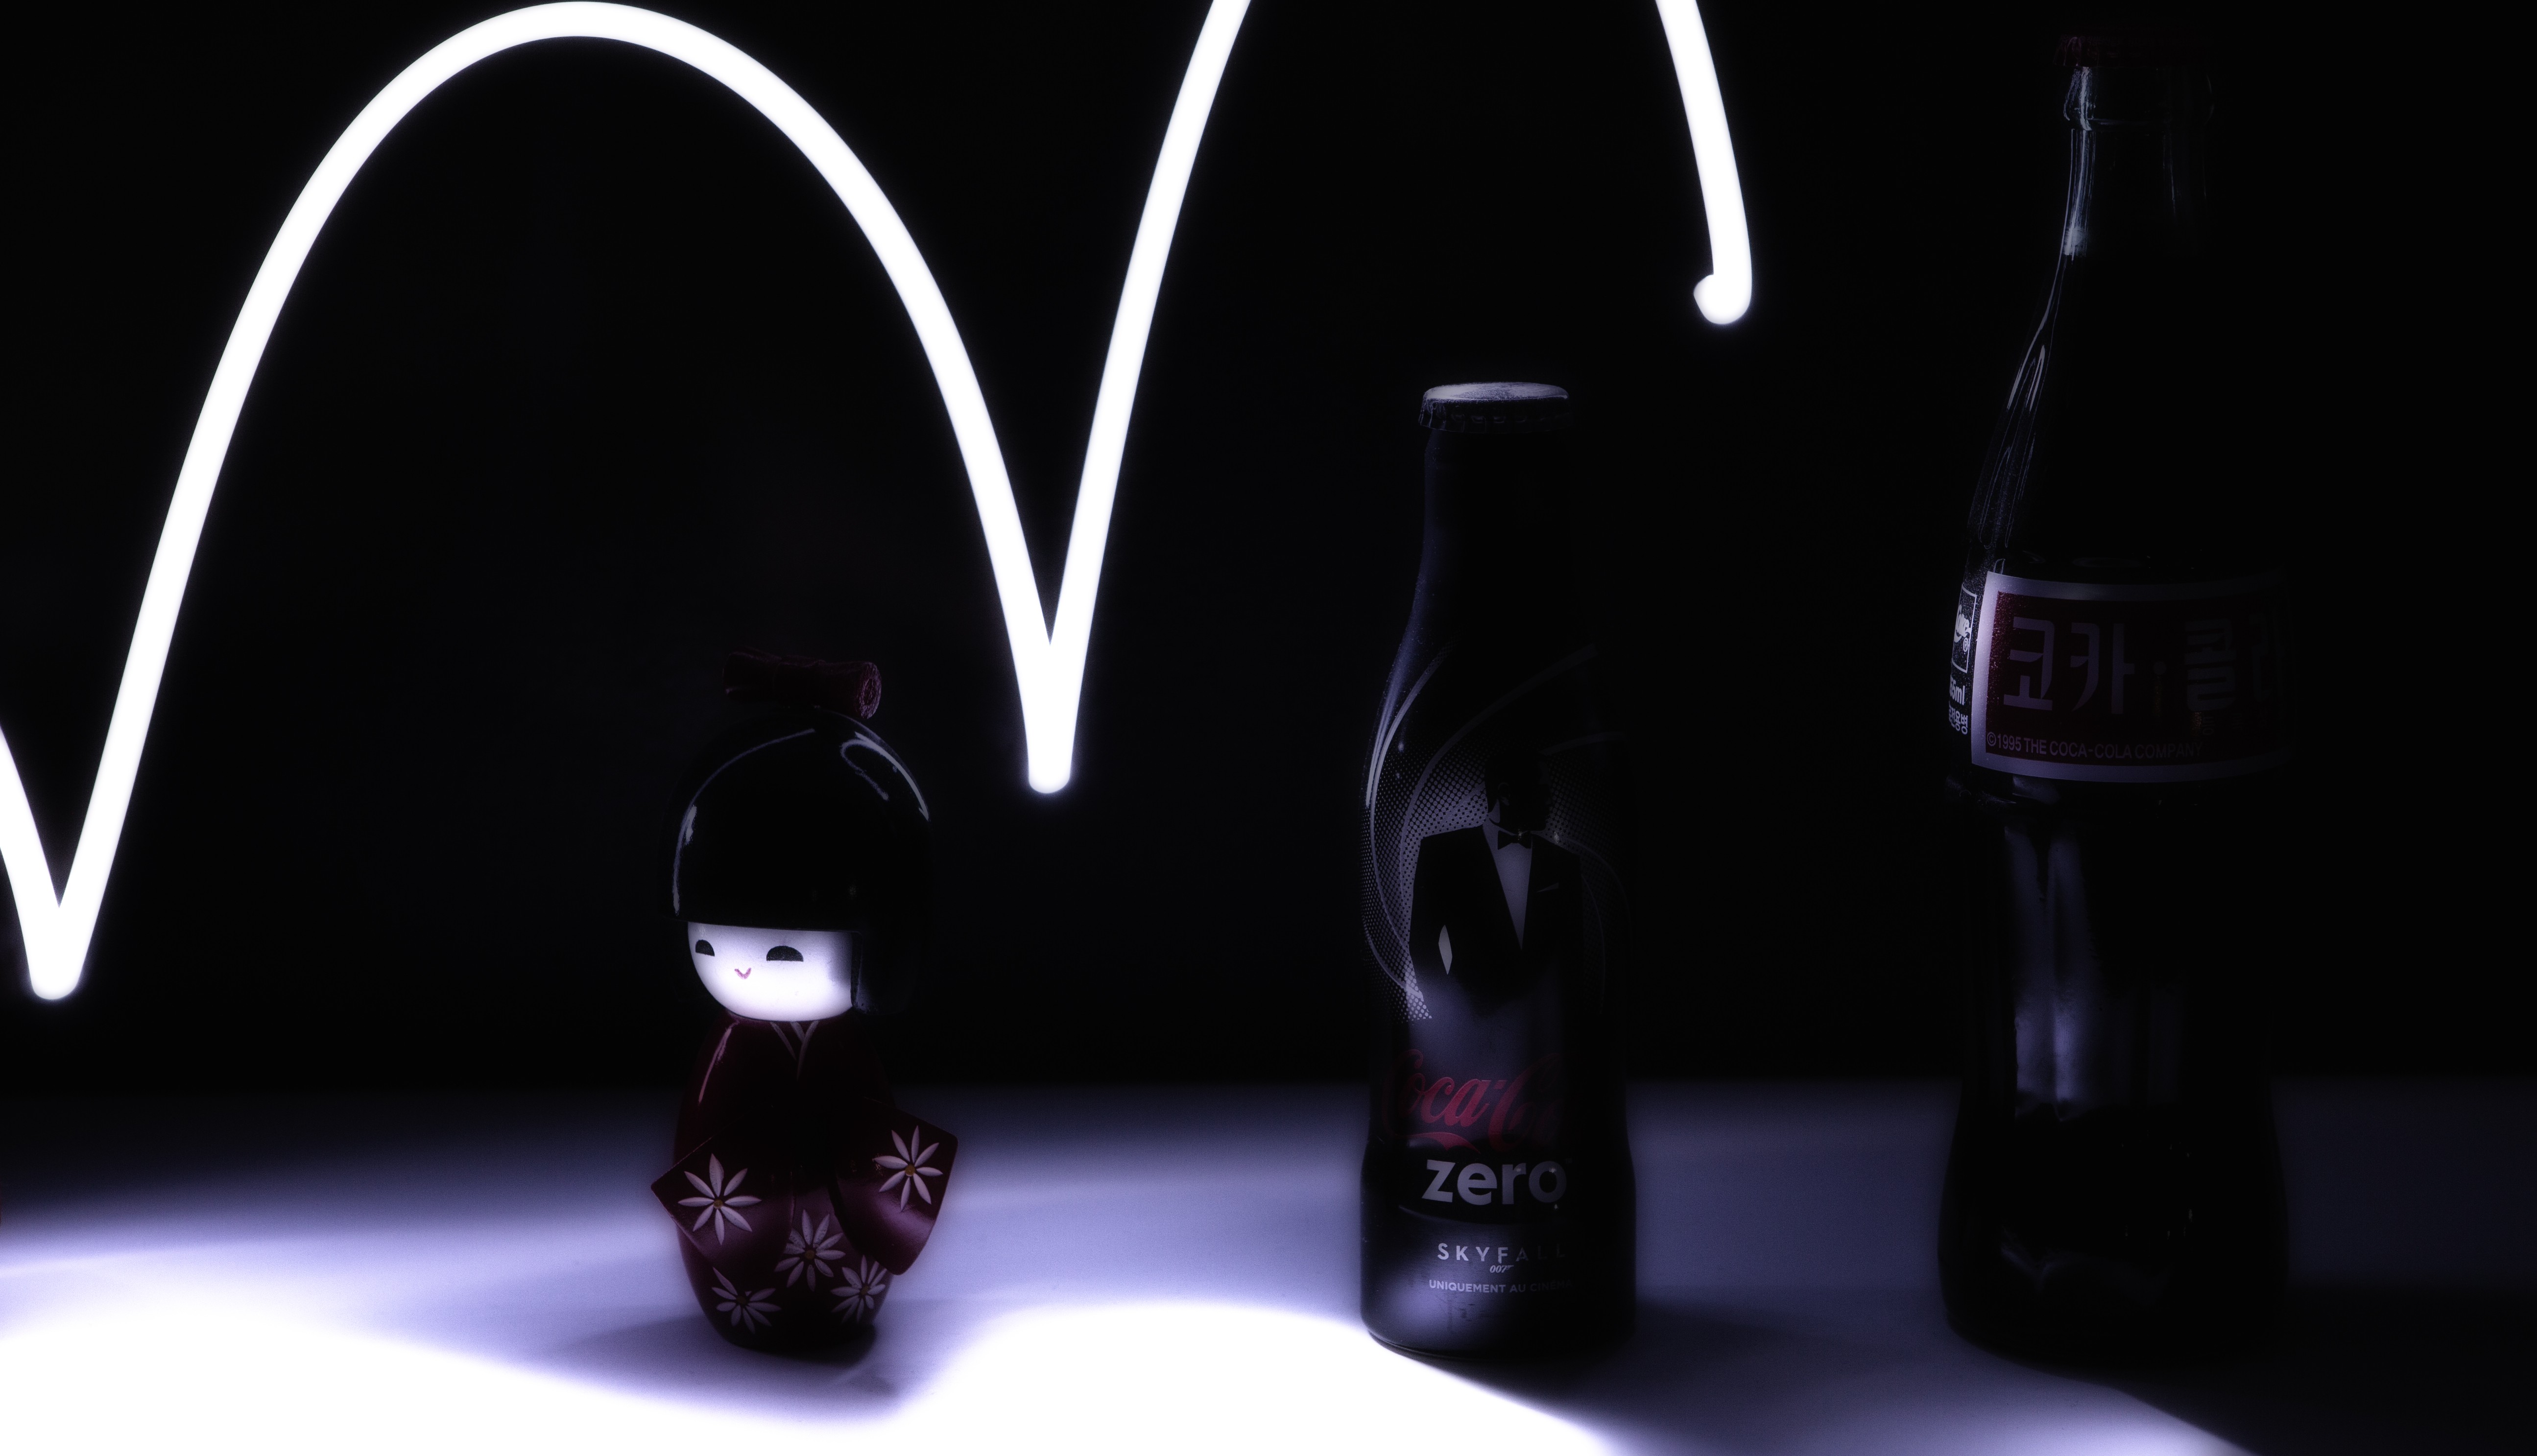 General 5180x2973 light painting Coca-Cola brand bottles simple background black background